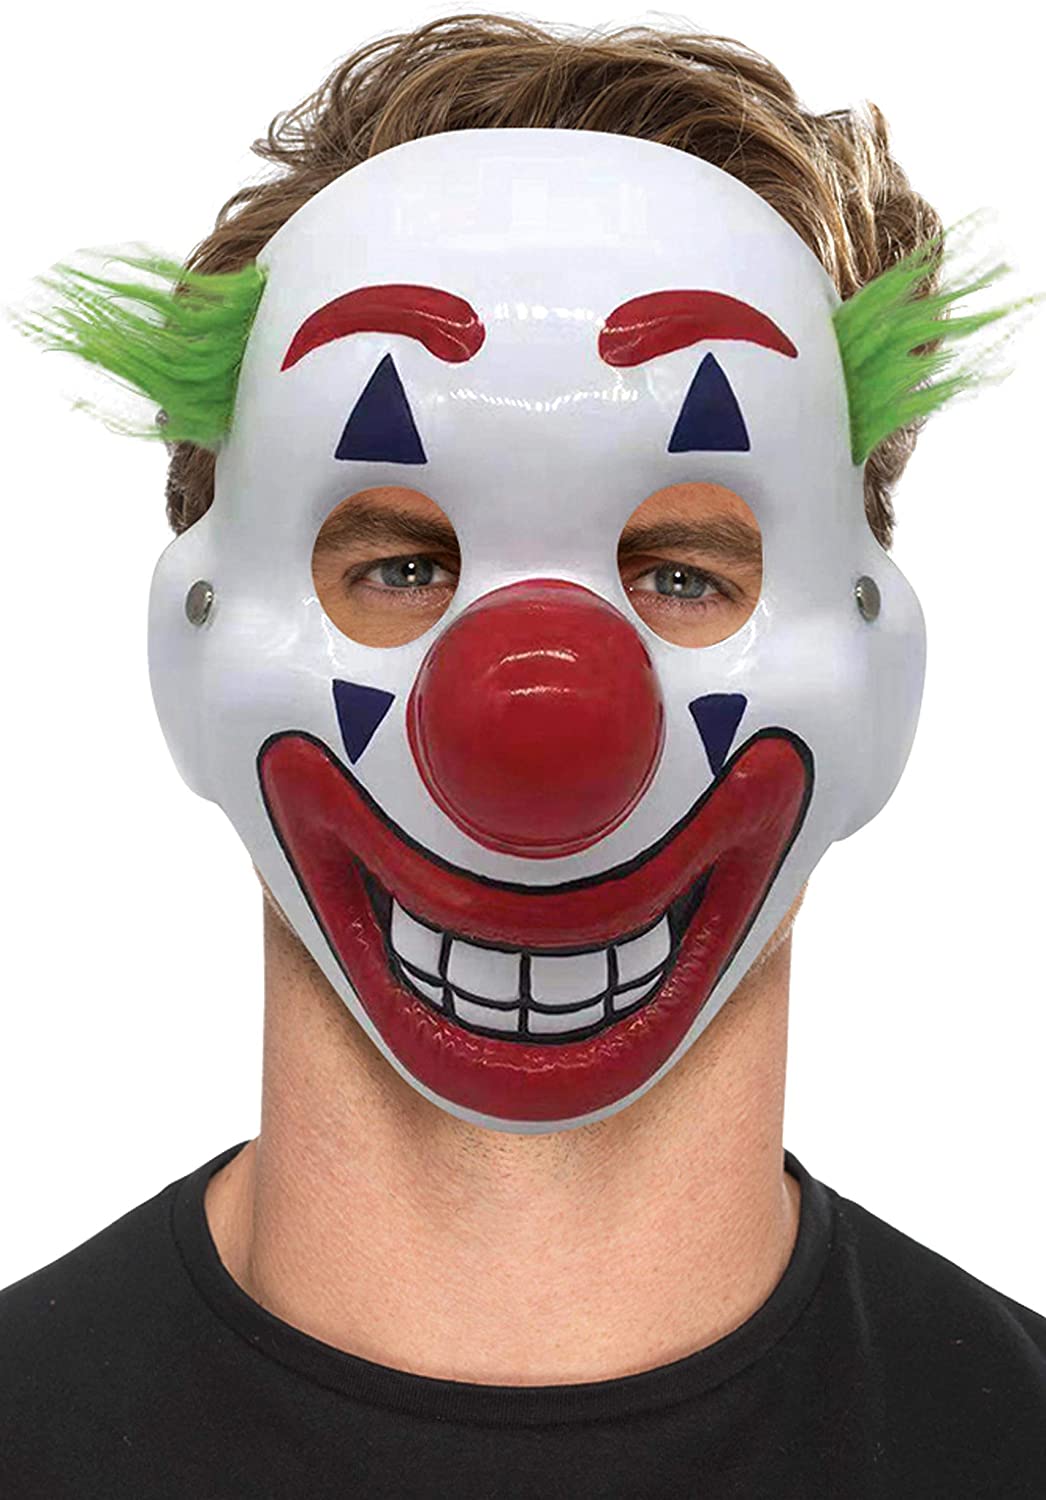 Smiffys 50026 PVC Clown Mask, with Hair & Elastic Strap, Unisex Adult, Blue, One Size